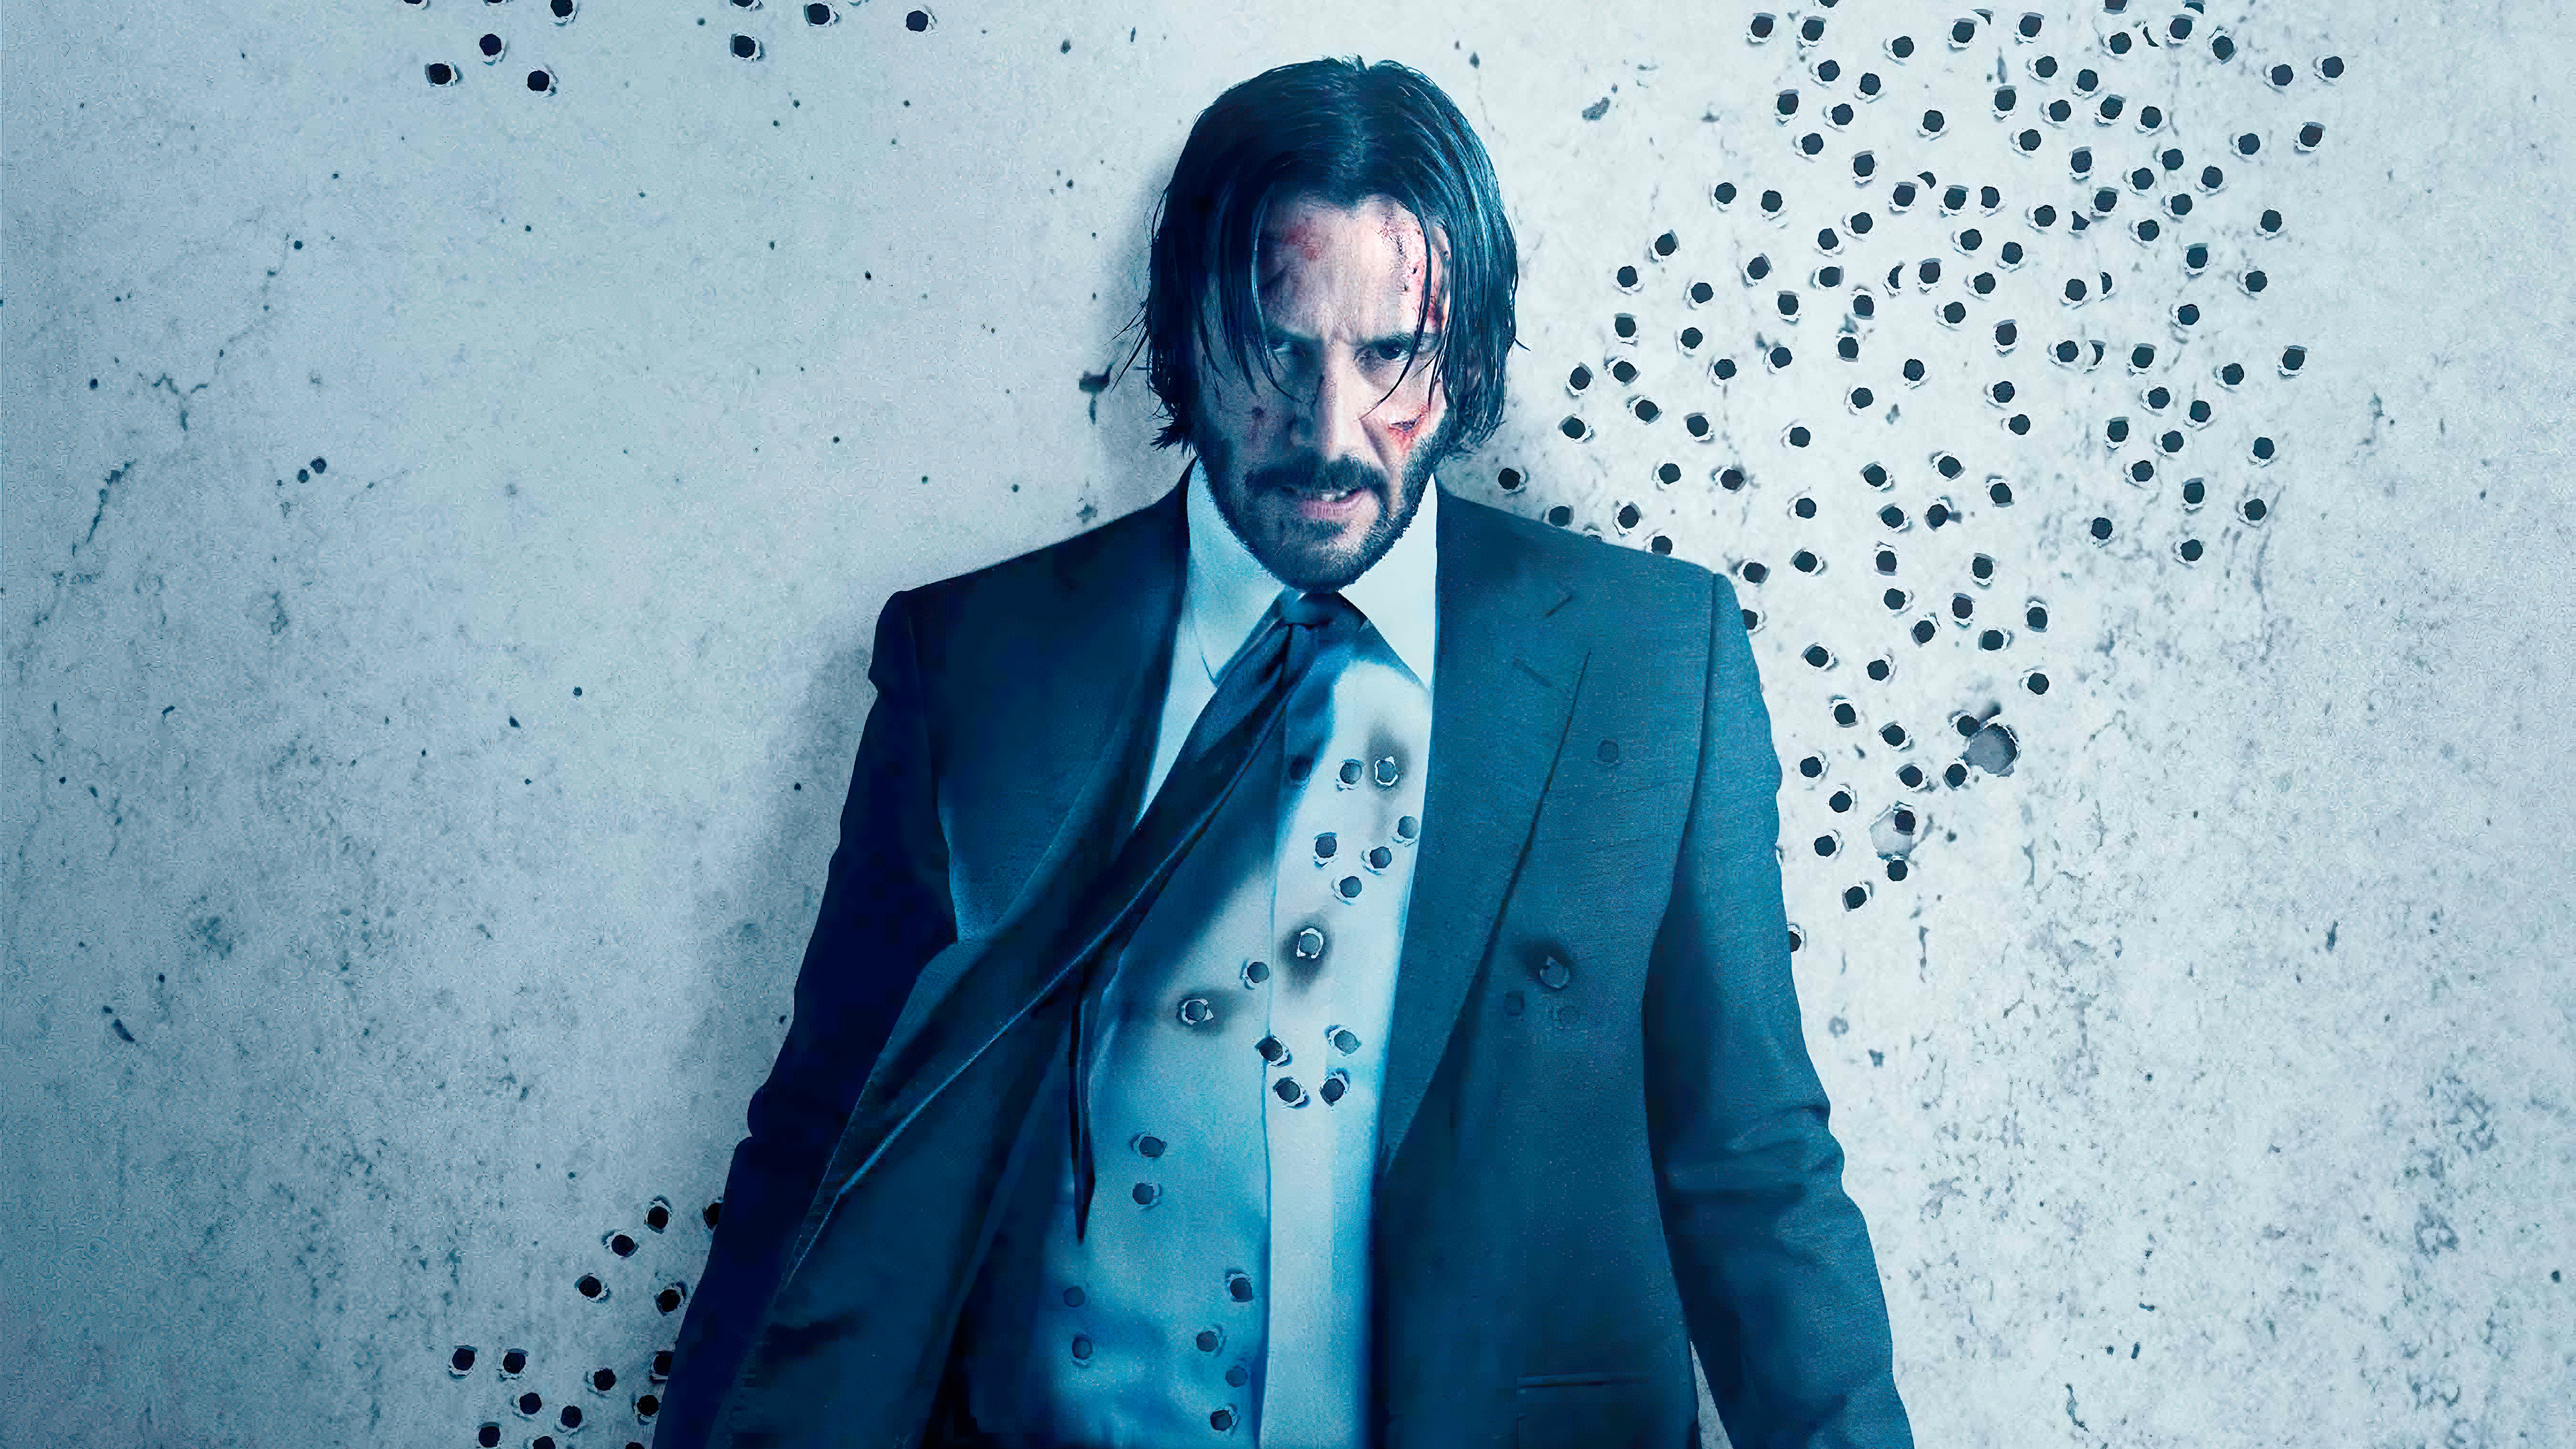 Free photo John Wick stands at the shot wall